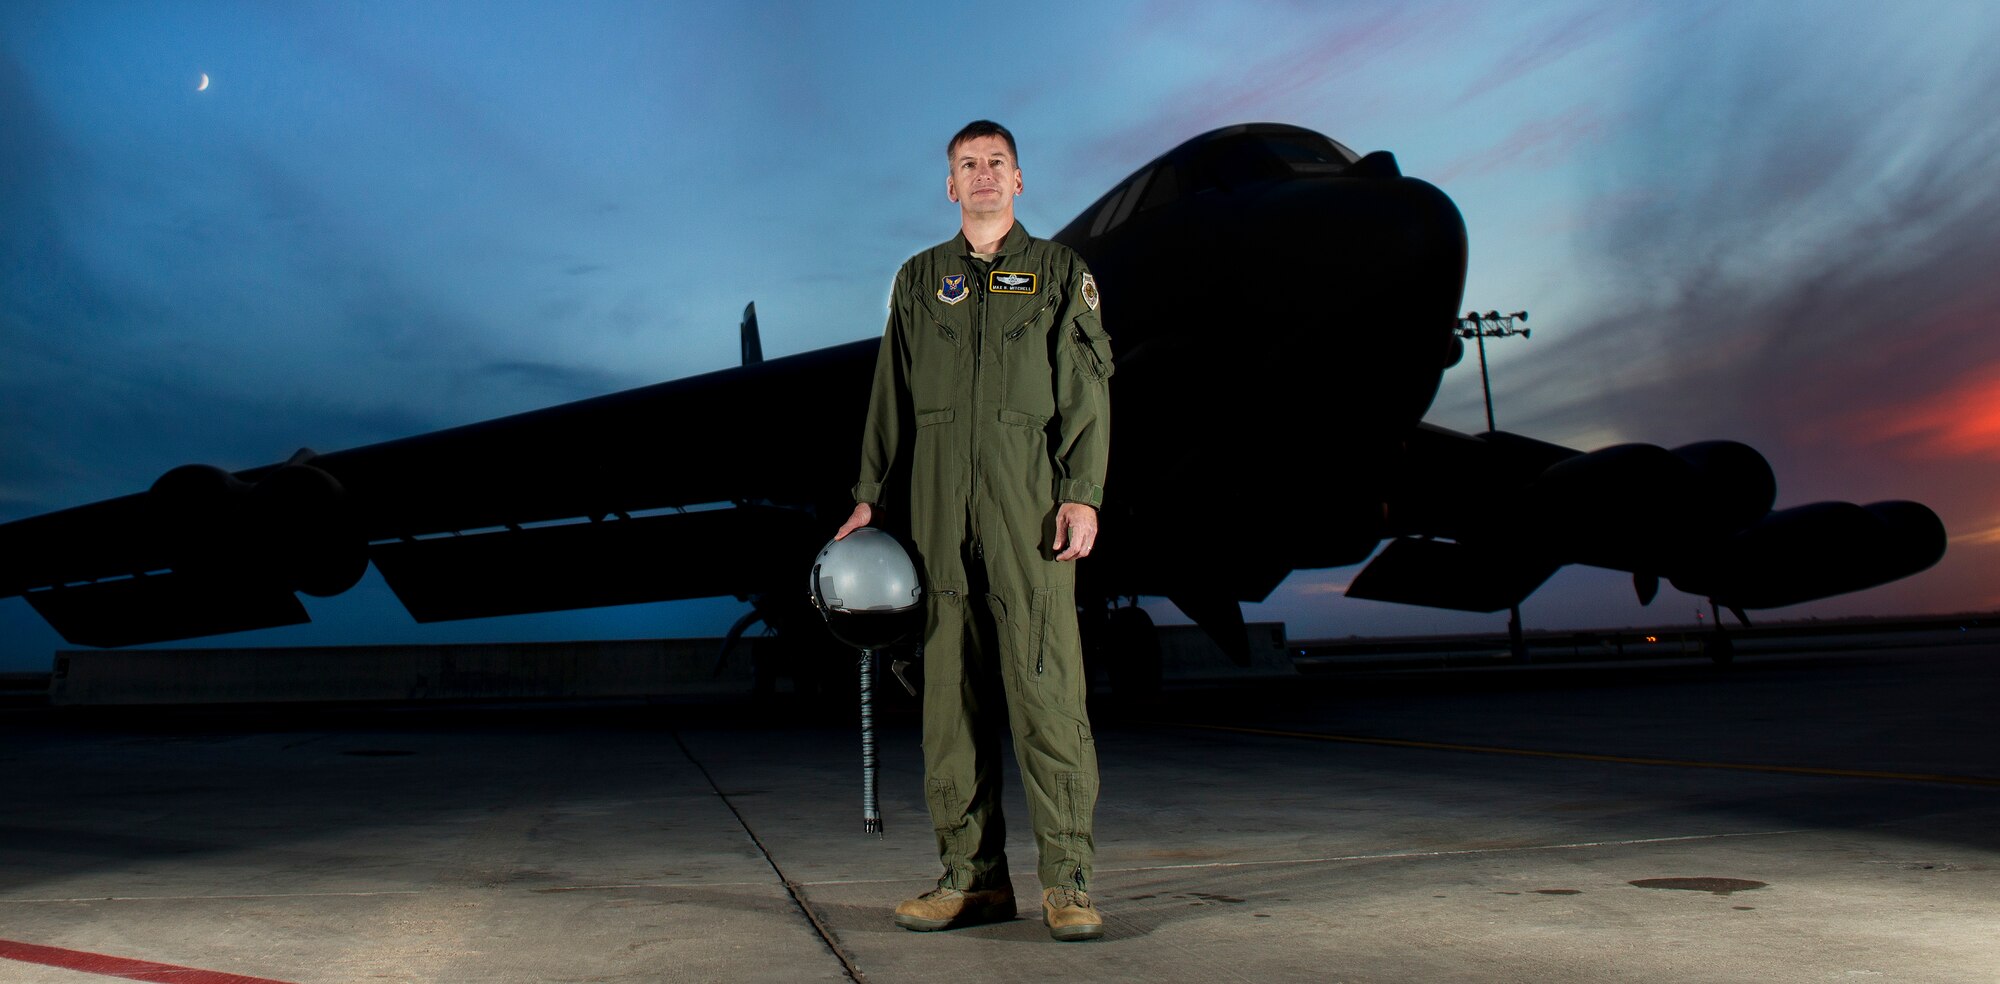 Col. Max B. Mitchell stands in front of the B-52H Stratofortress for the last time as an active duty Airman, Oct. 9. After serving as vice wing commander of the 5th Bomb Wing, Mitchell officially retired from the U.S. Air Force, Oct. 11. Mitchell served 25 years with nearly 4,000 flying hours in the B-52 as a master navigator. (U.S Air Force photo/Tech. Sgt. Aaron Allmon)